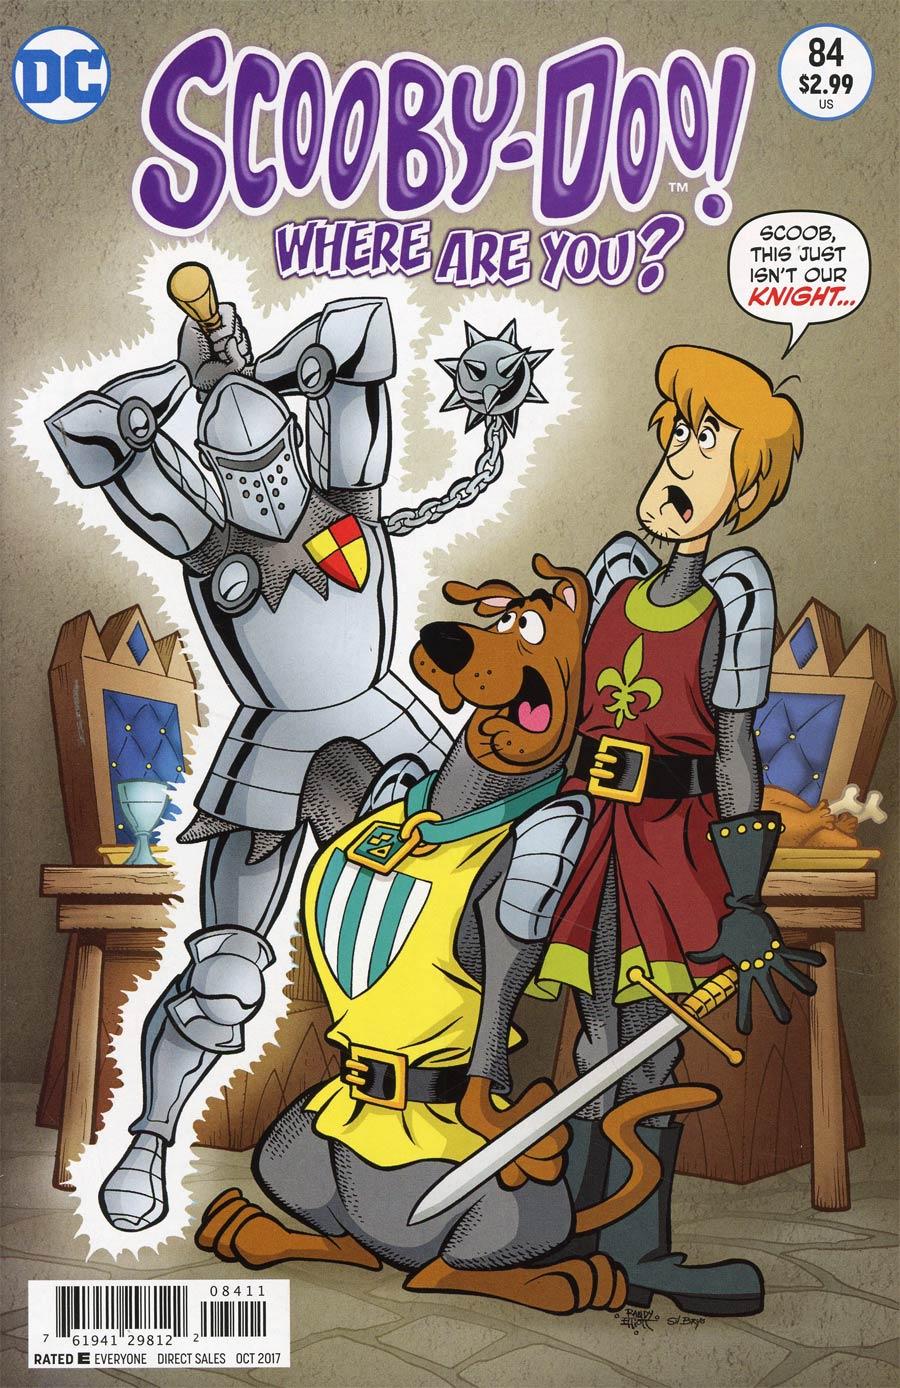 Scooby-Doo Where Are You Vol. 1 #84